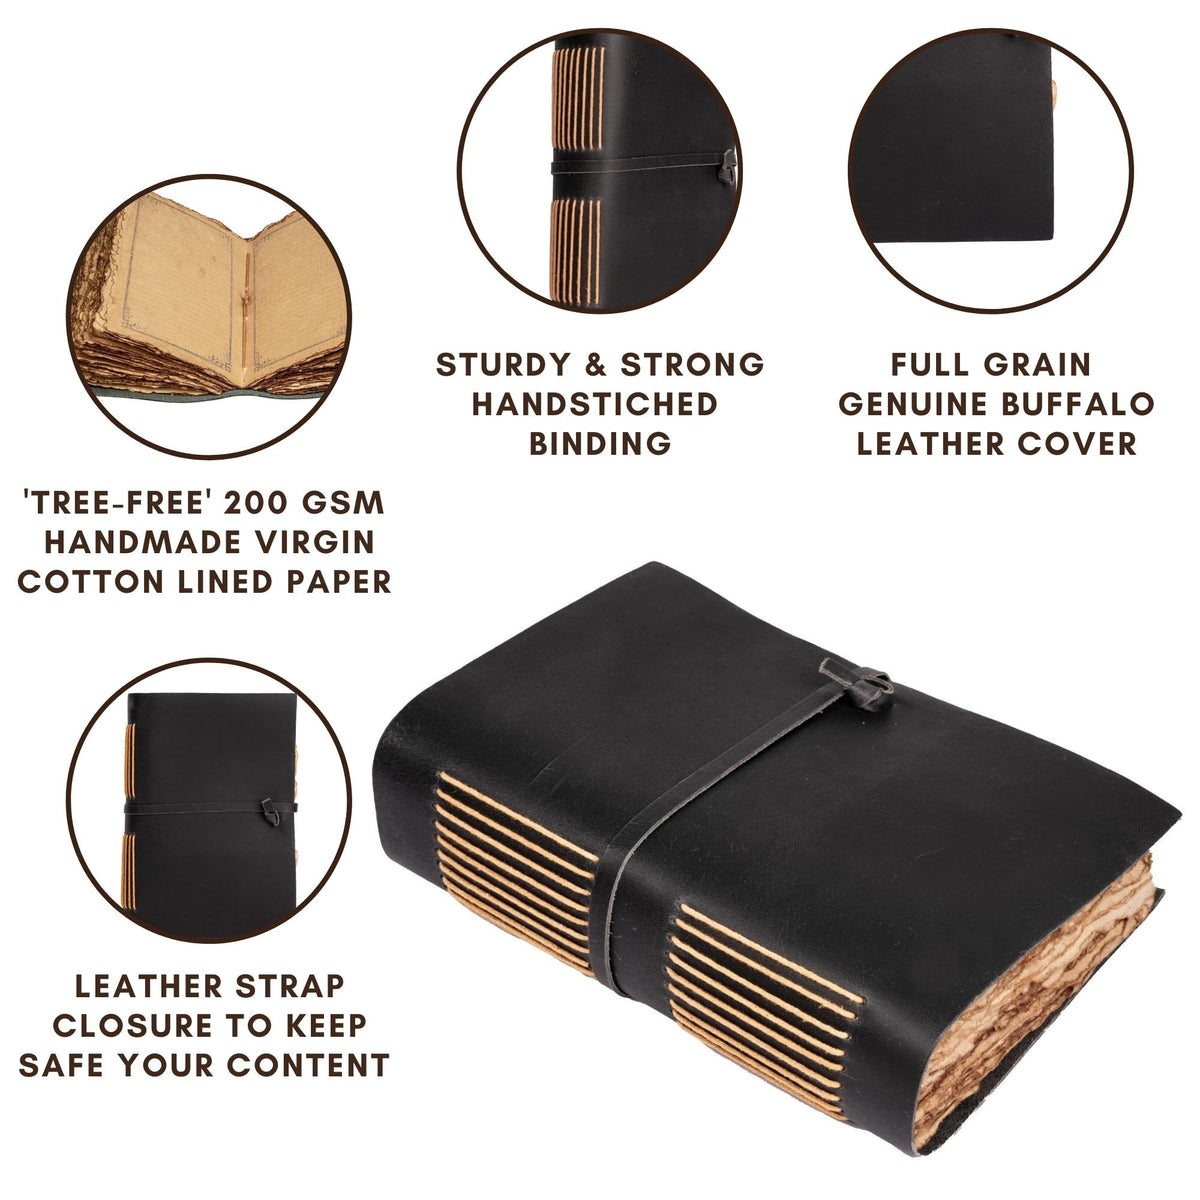 Leather Village black colour leather journal product key features